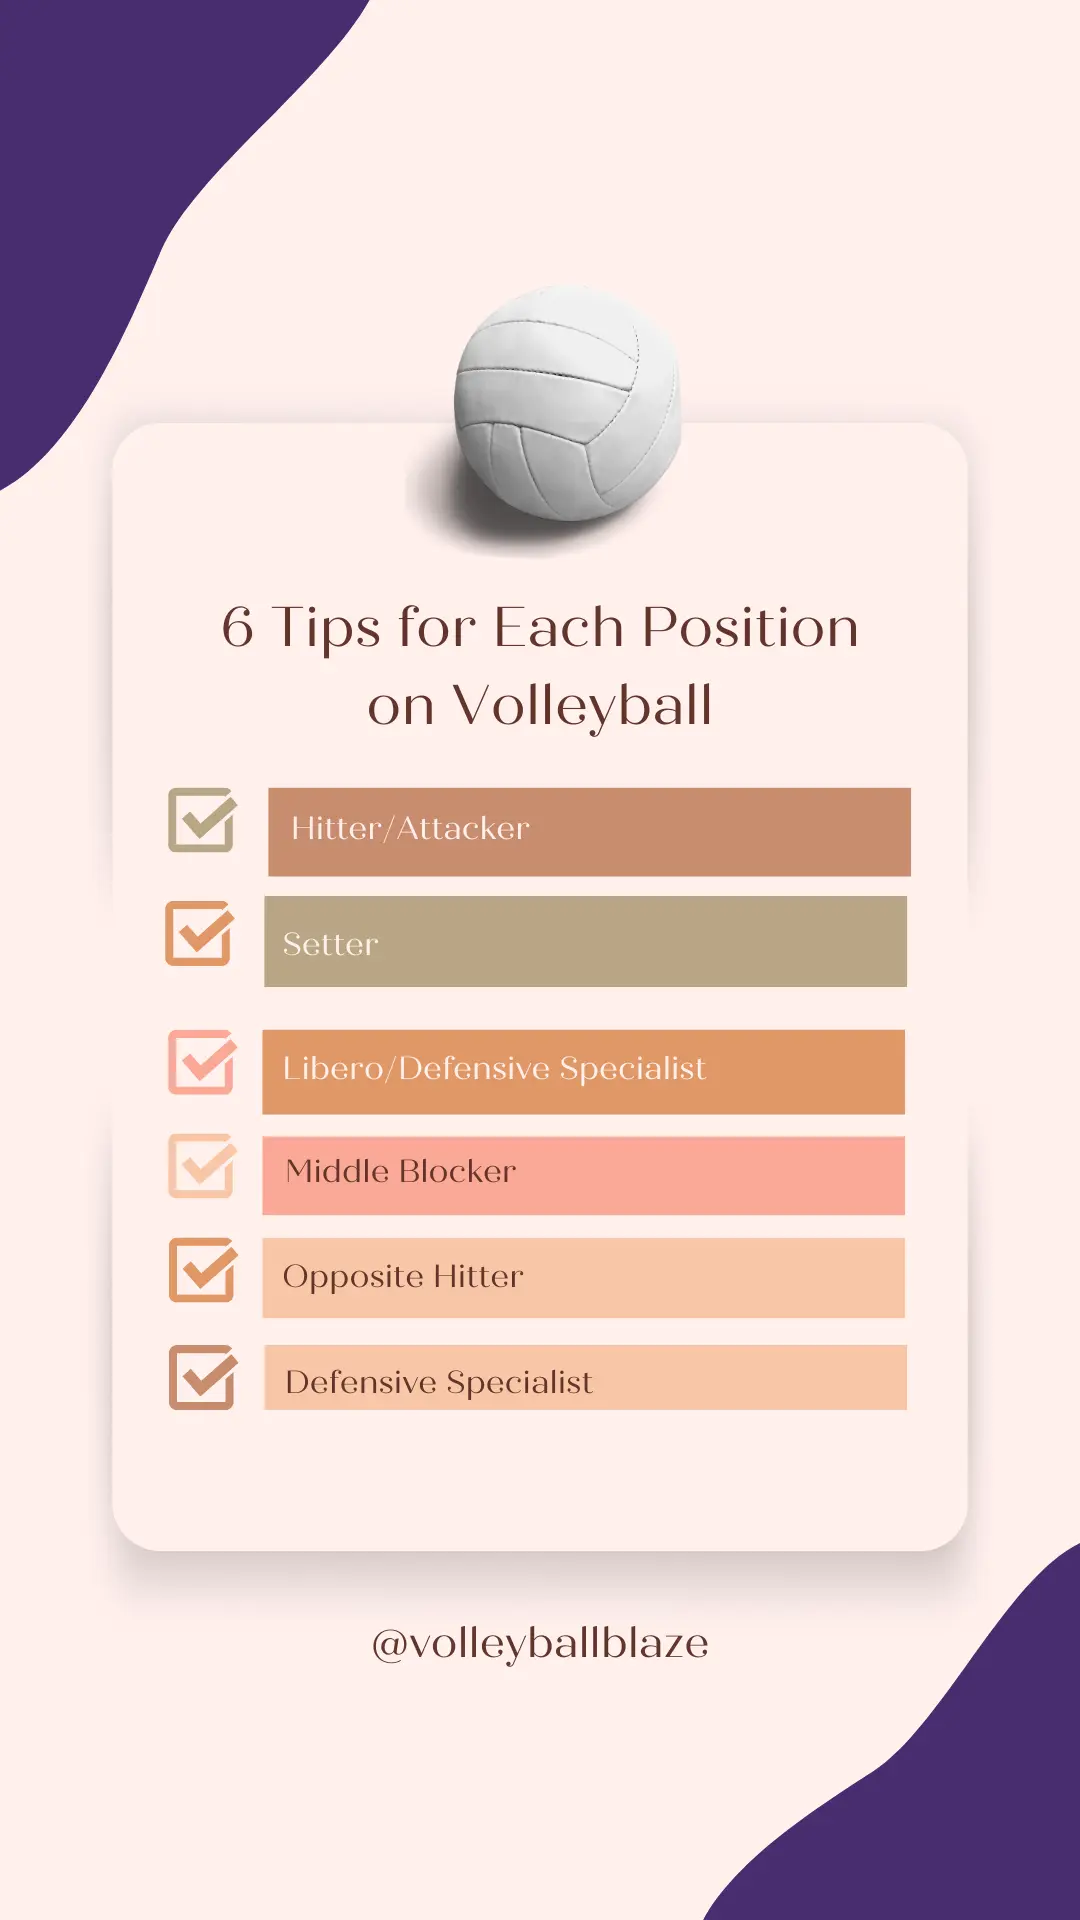 What Volleyball Position Should I Play